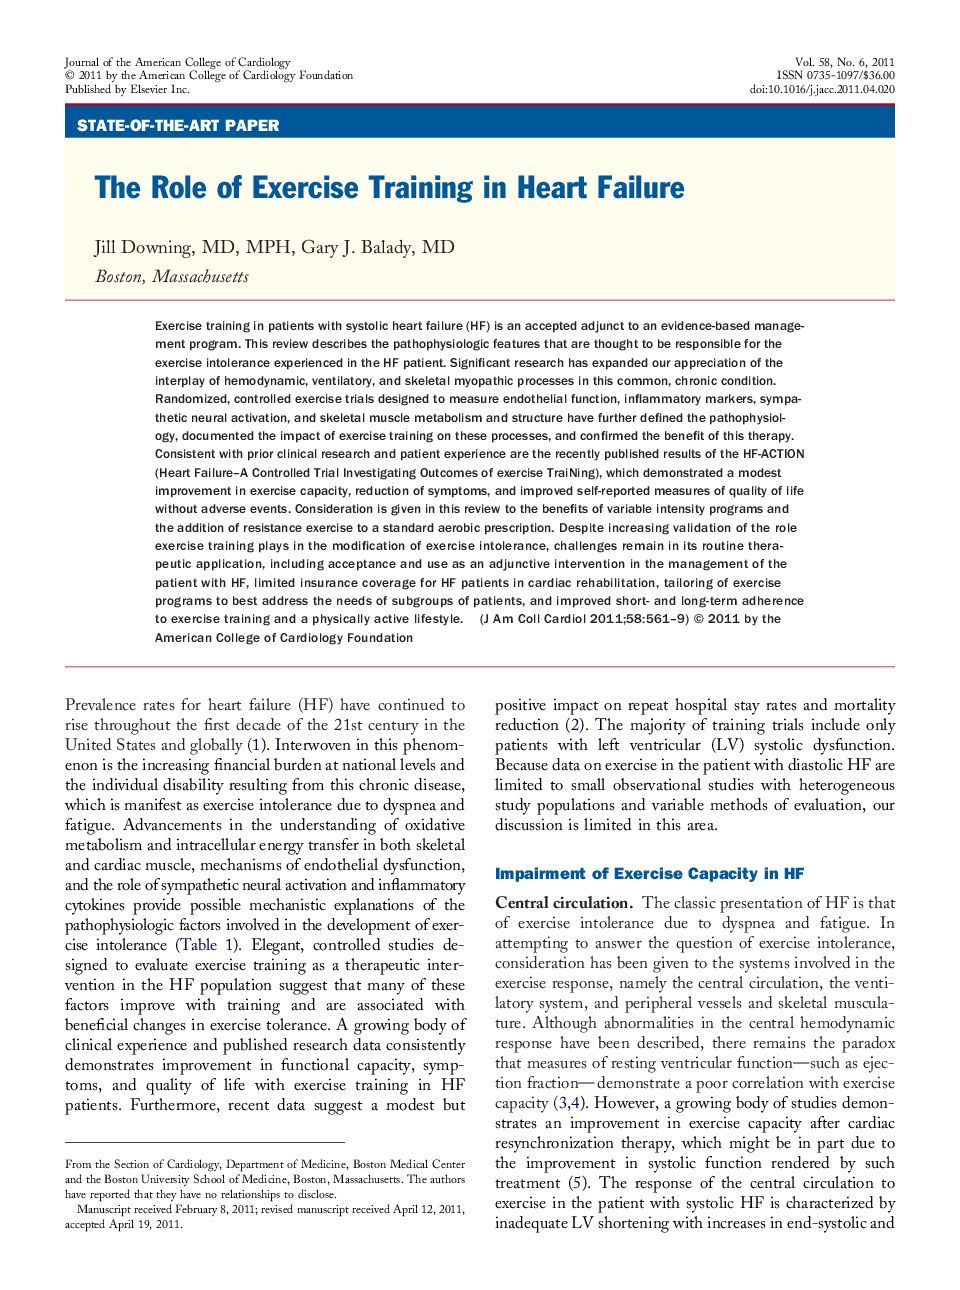 The Role of Exercise Training in Heart Failure 